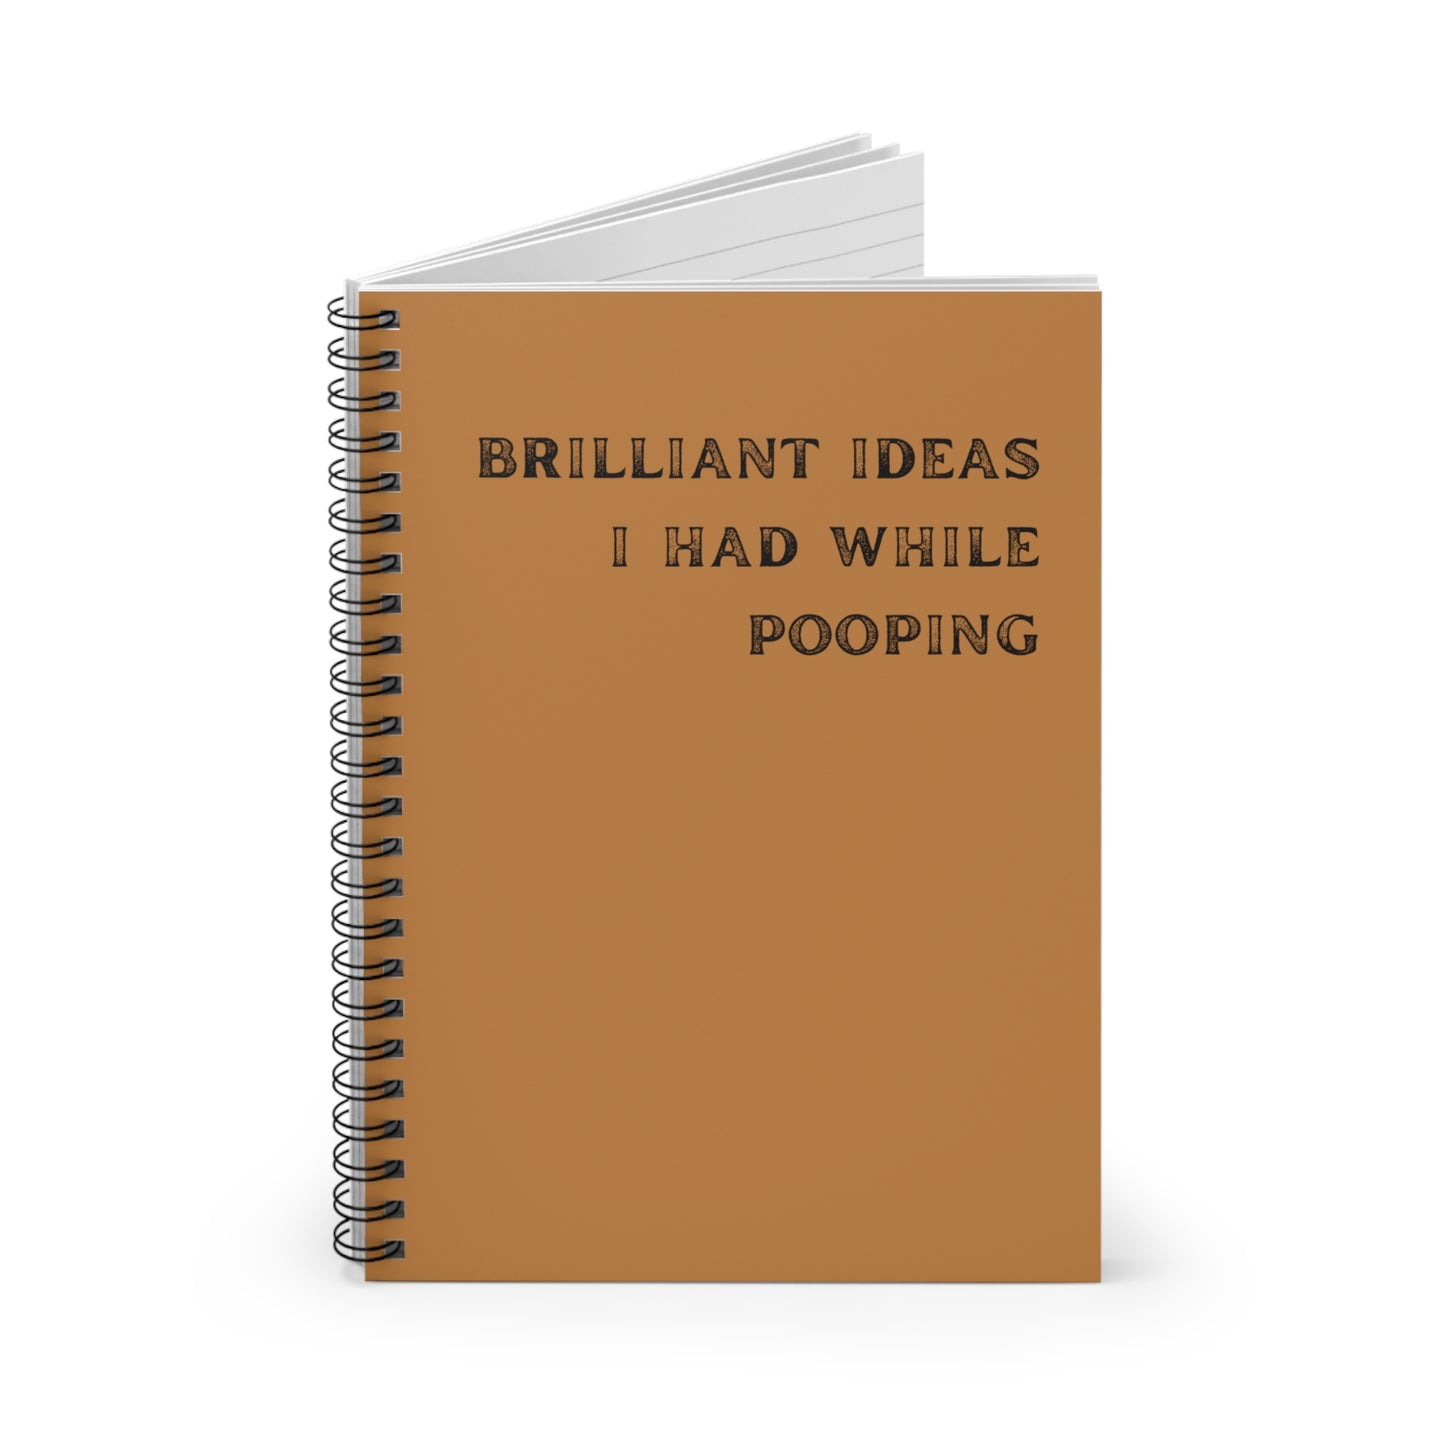 Funny Notebook, Brilliant Ideas I Had While Pooping, notebook, spiral, retirement, boss gift, early retirement, birthday gift